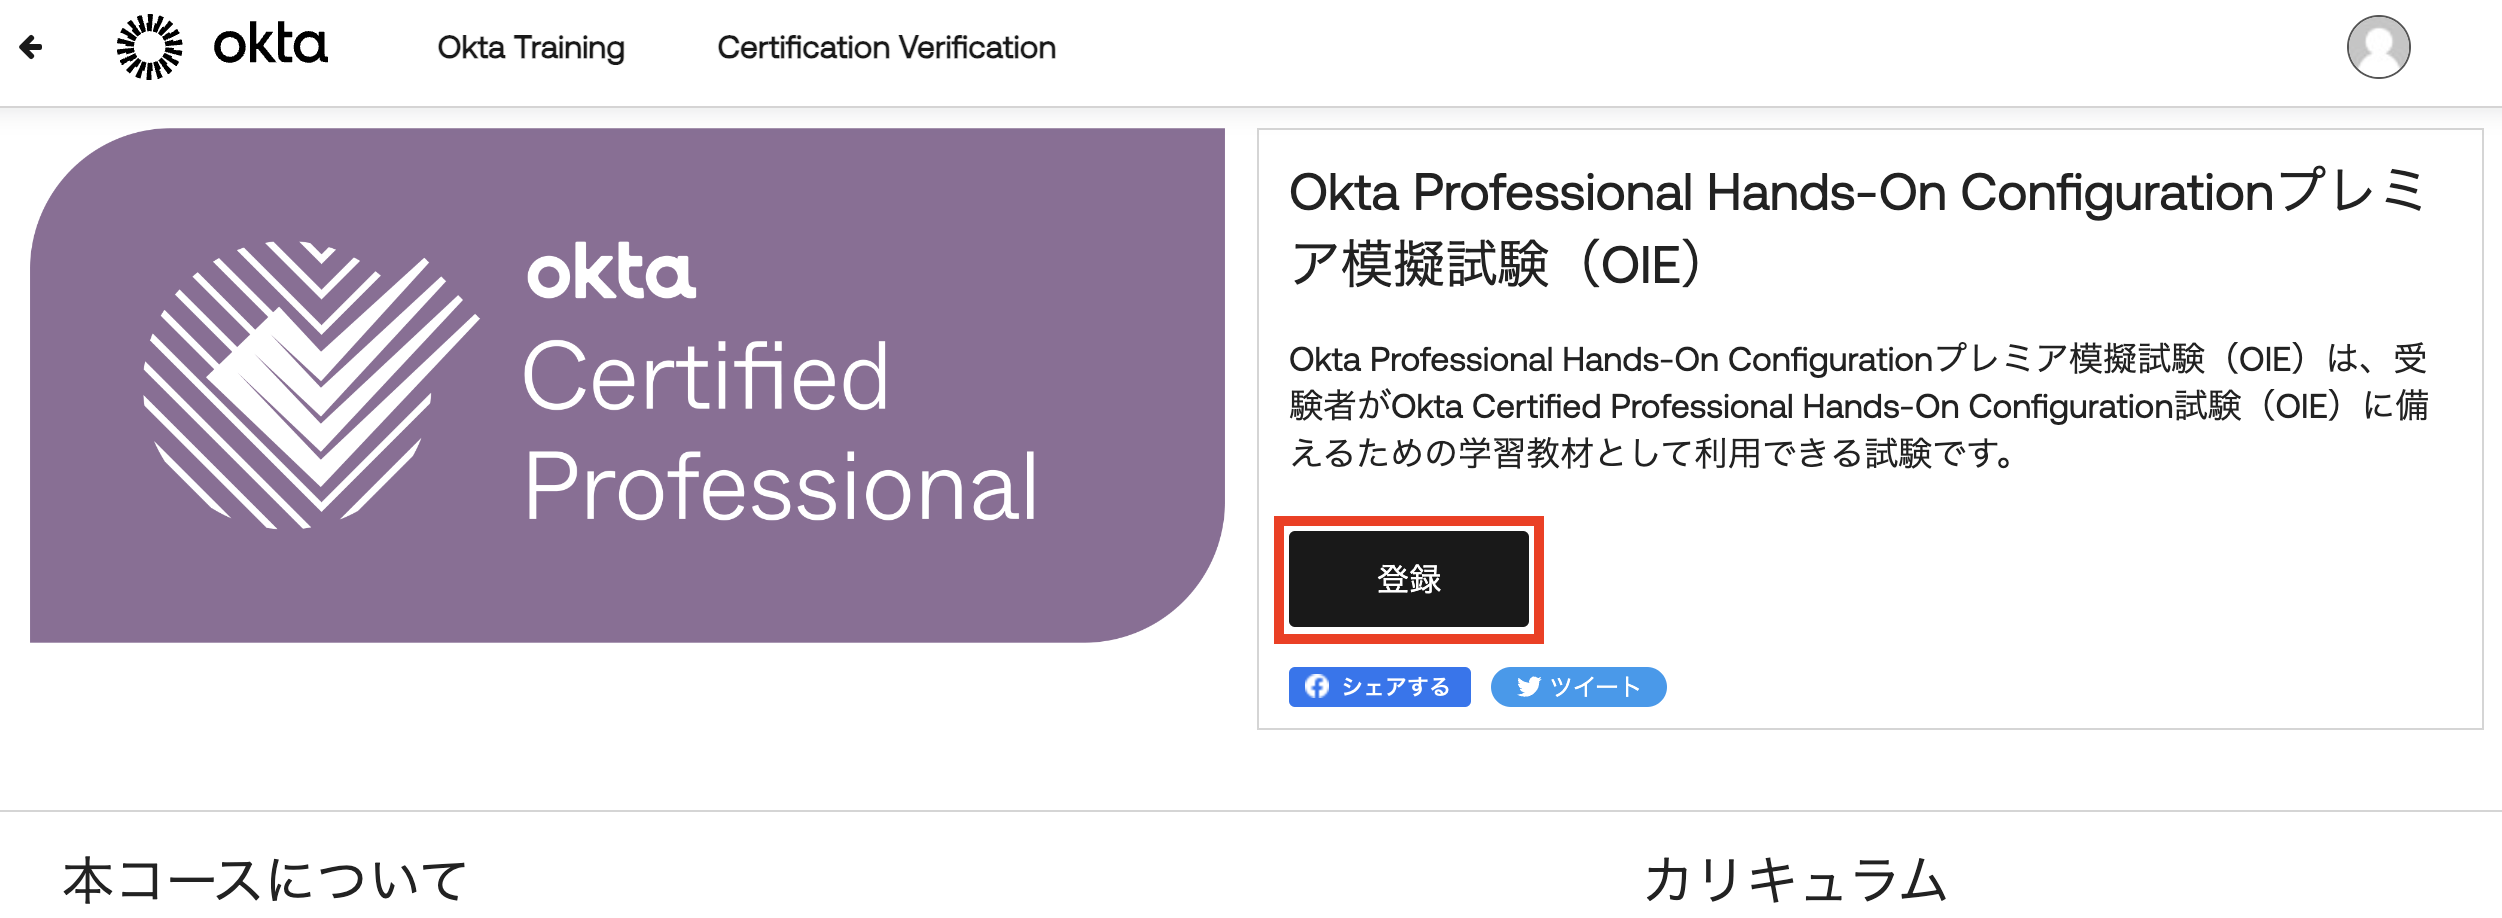 Image of the Okta Certified Professional Hands-On Configuration, with a focus on the Registration call to action.